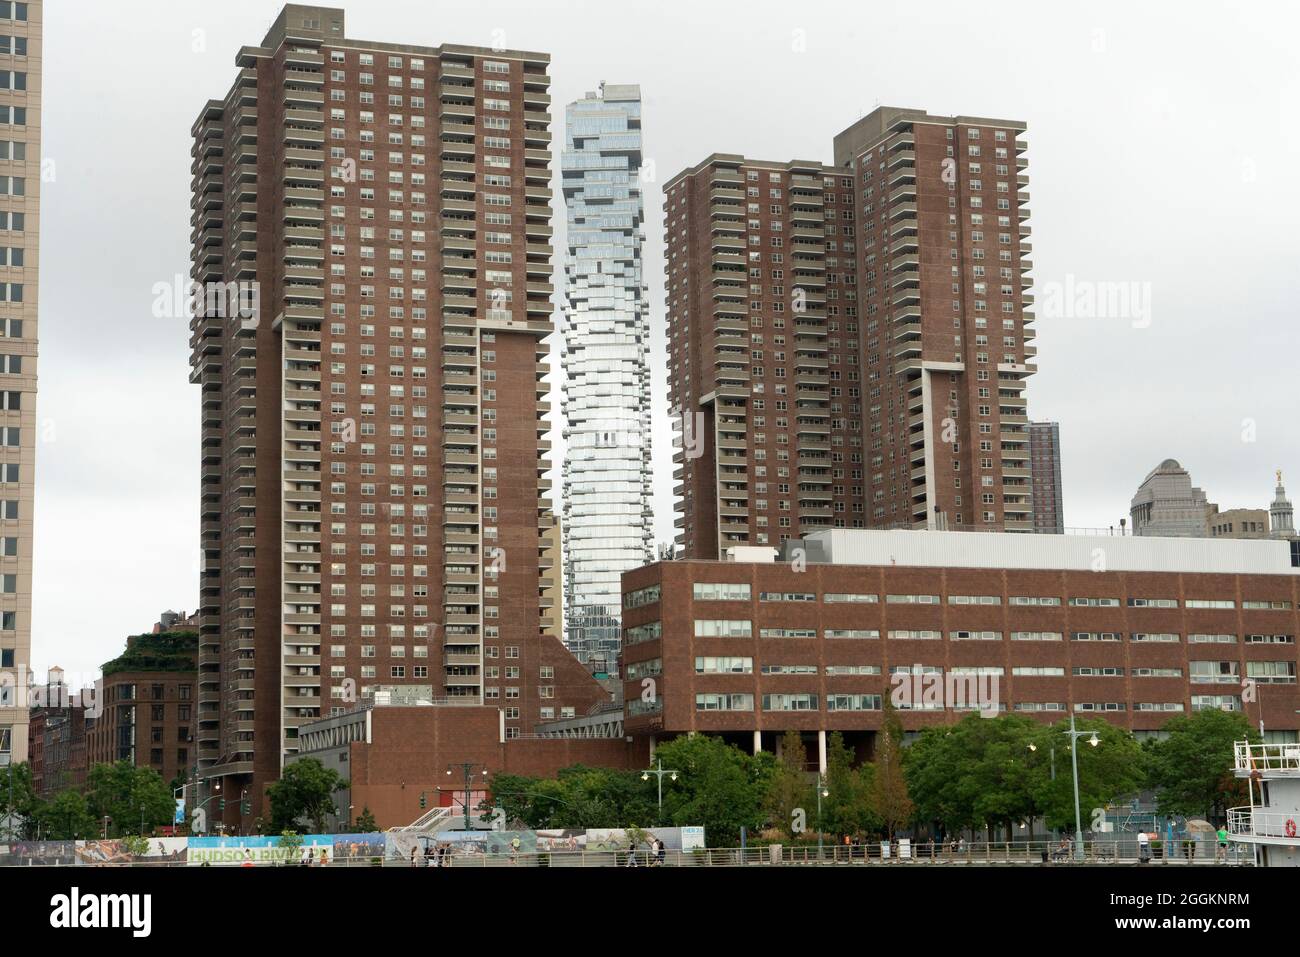 Apartment buildings tower over the Borough of Manhattan Community College and Hudson River Park in the Tribeca neighborhood of Lower Manhattan. Stock Photo